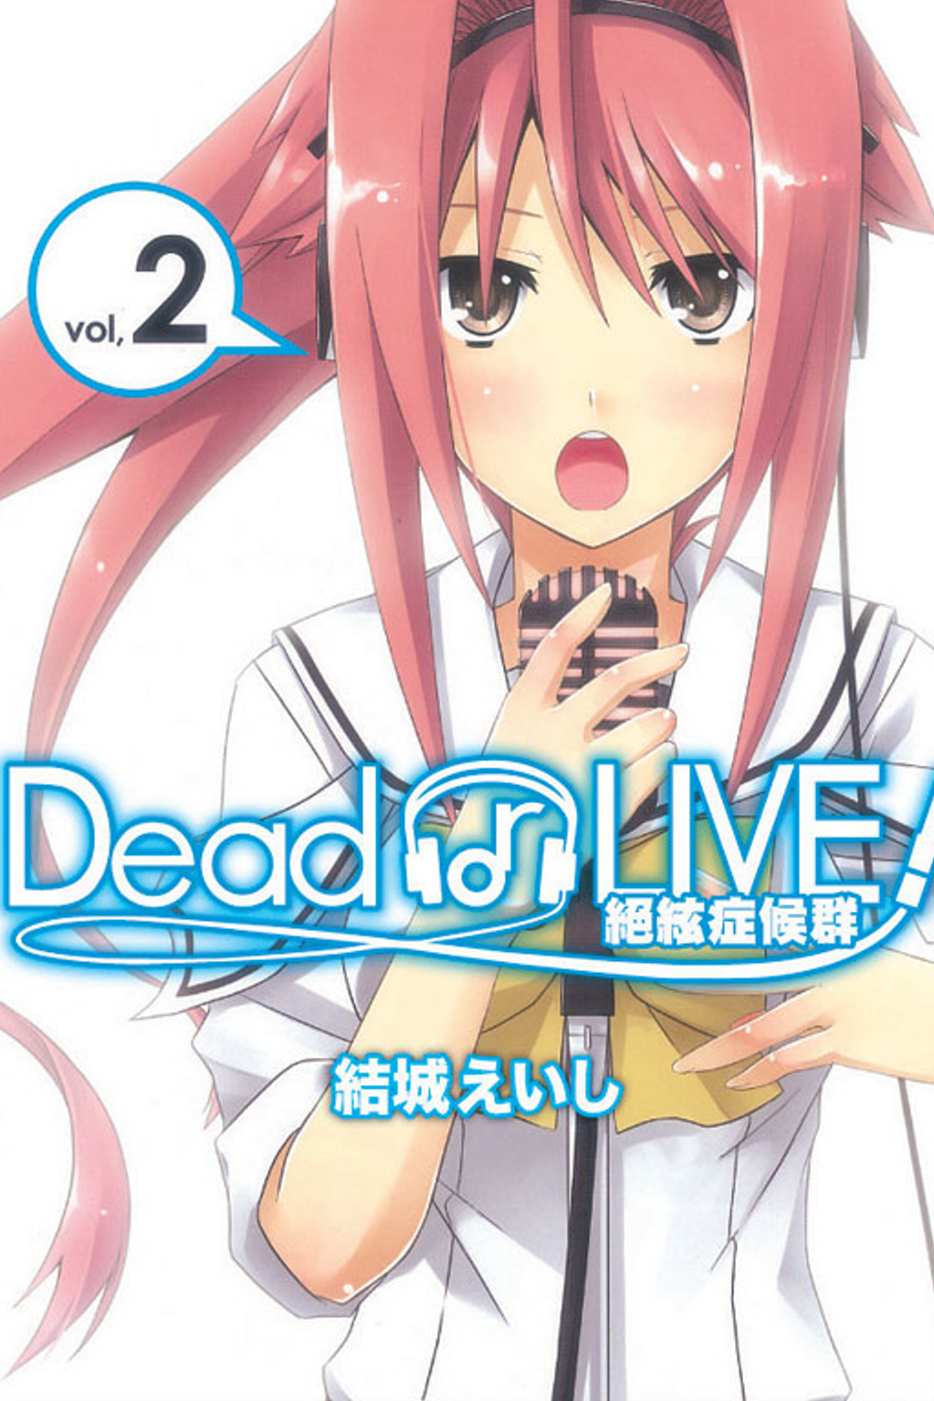 Dead or LIVE 絕絃症...